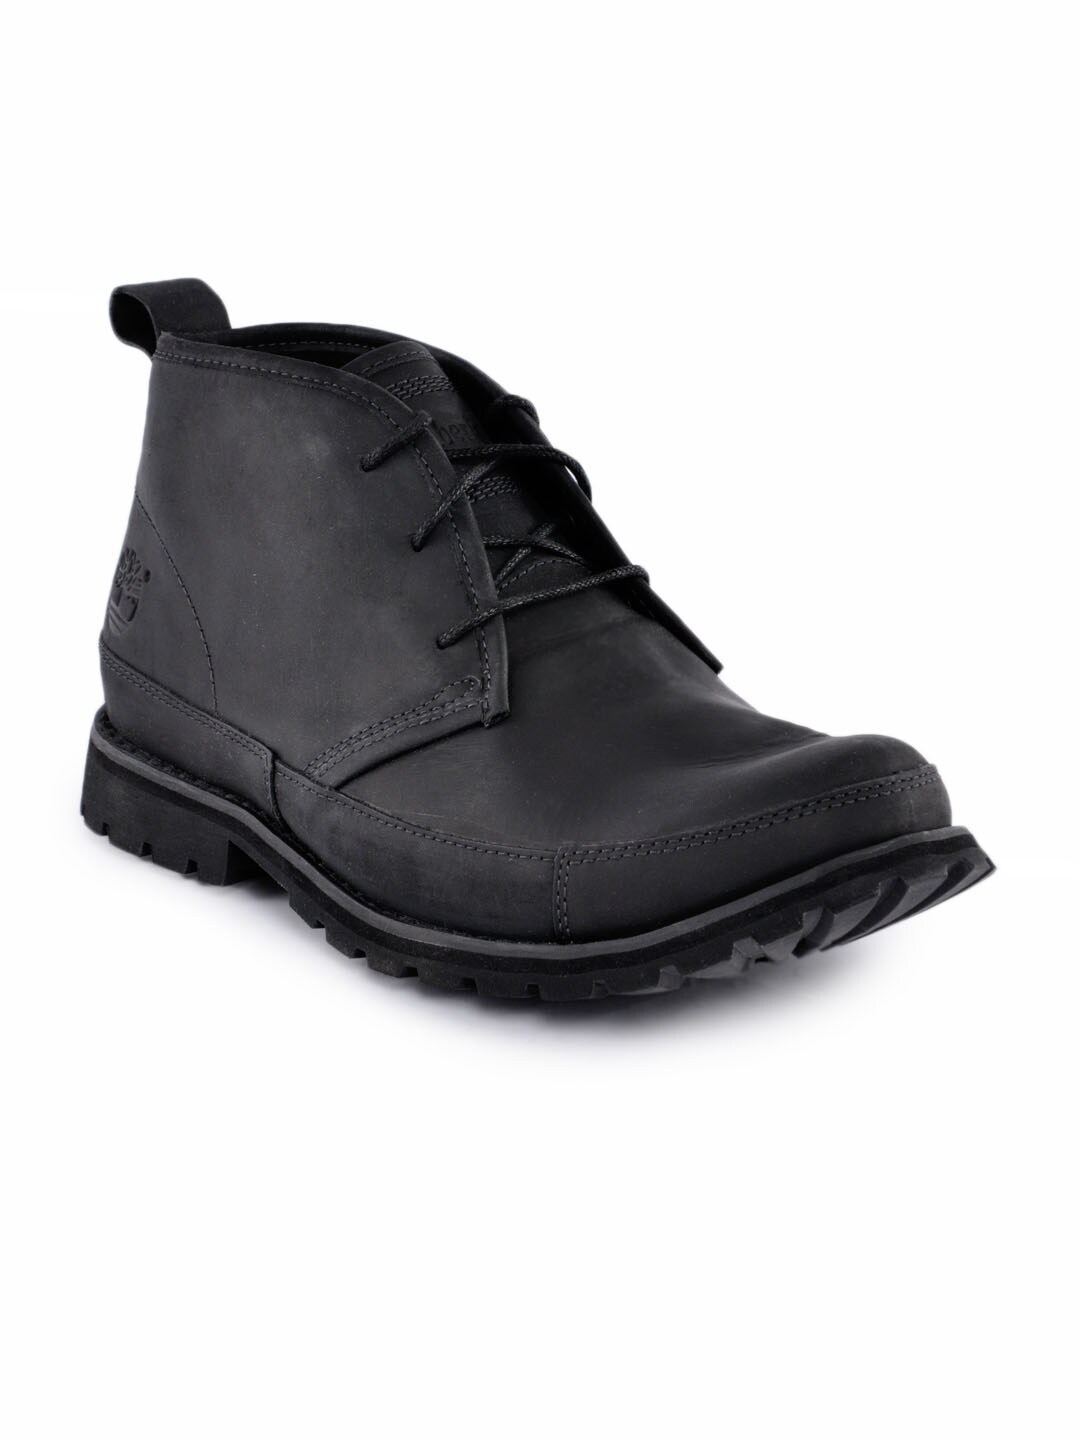 Timberland Men Black Casual Shoes